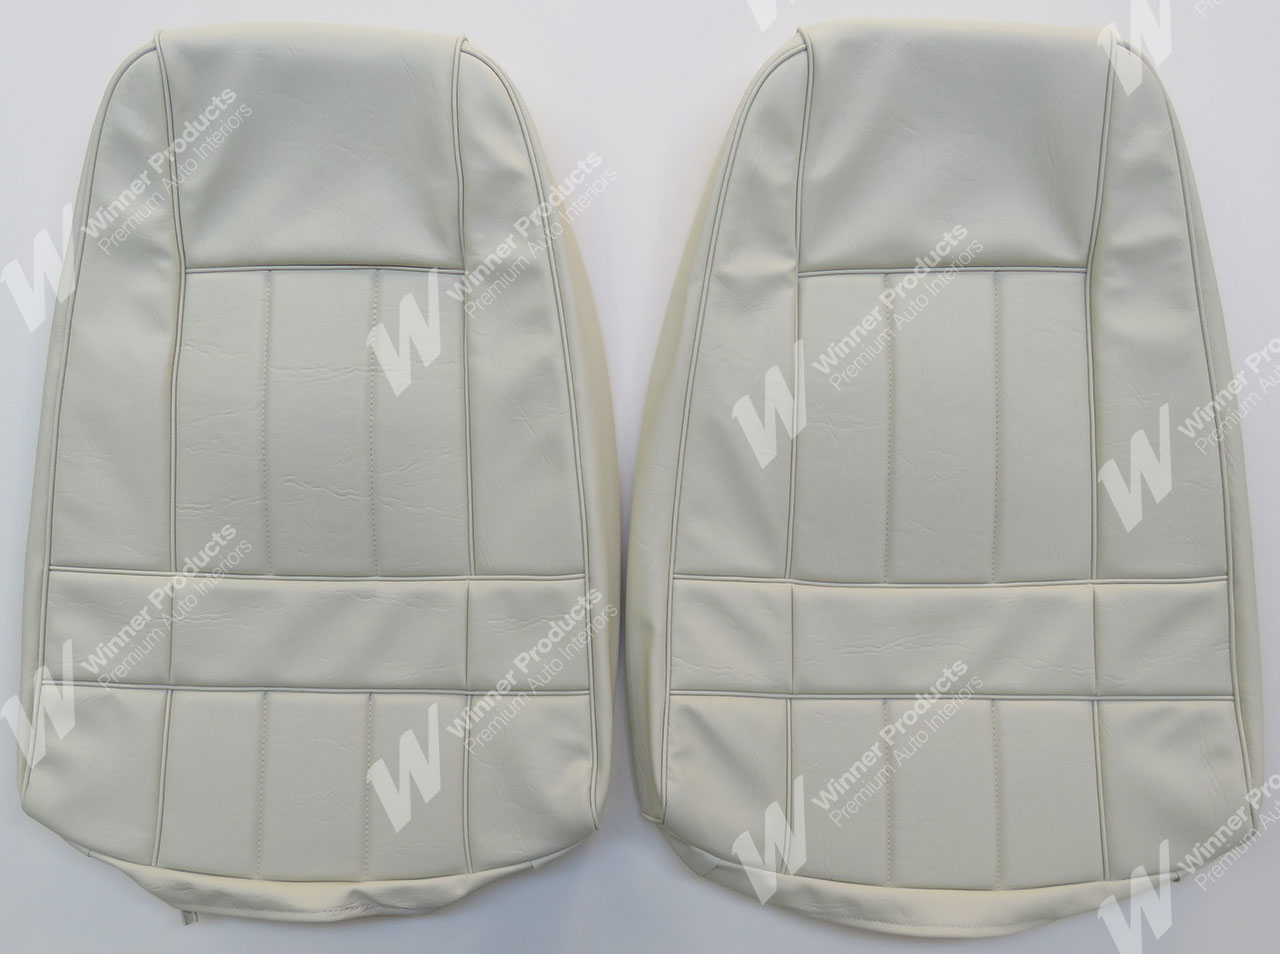 Ford GT XA GT Coupe W White Seat Covers (Image 2 of 4)